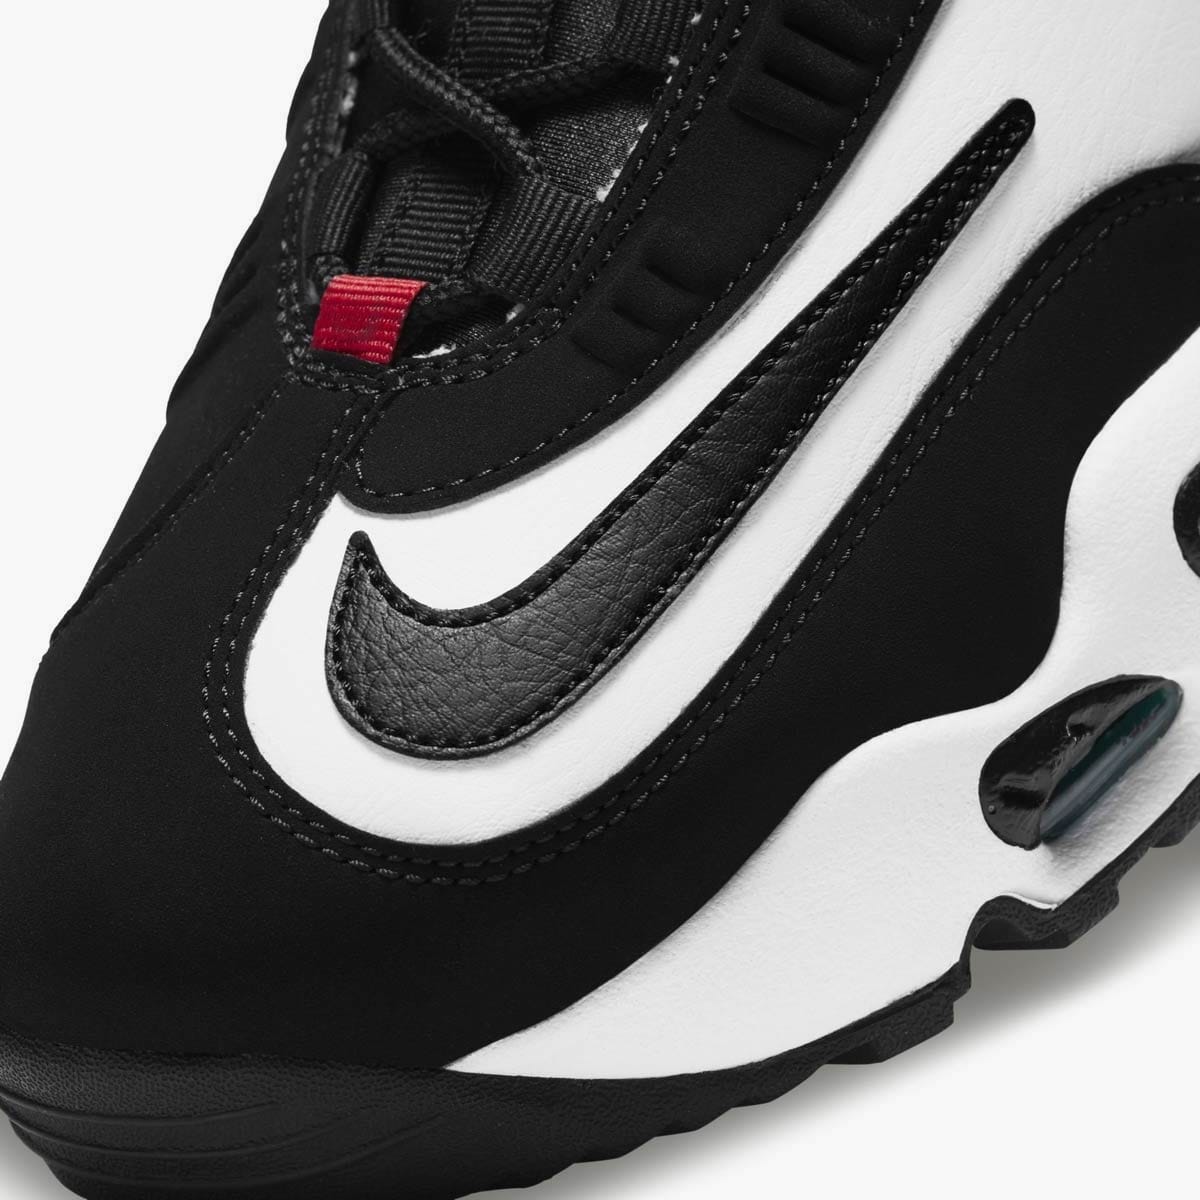 ken griffey jr shoes black and red